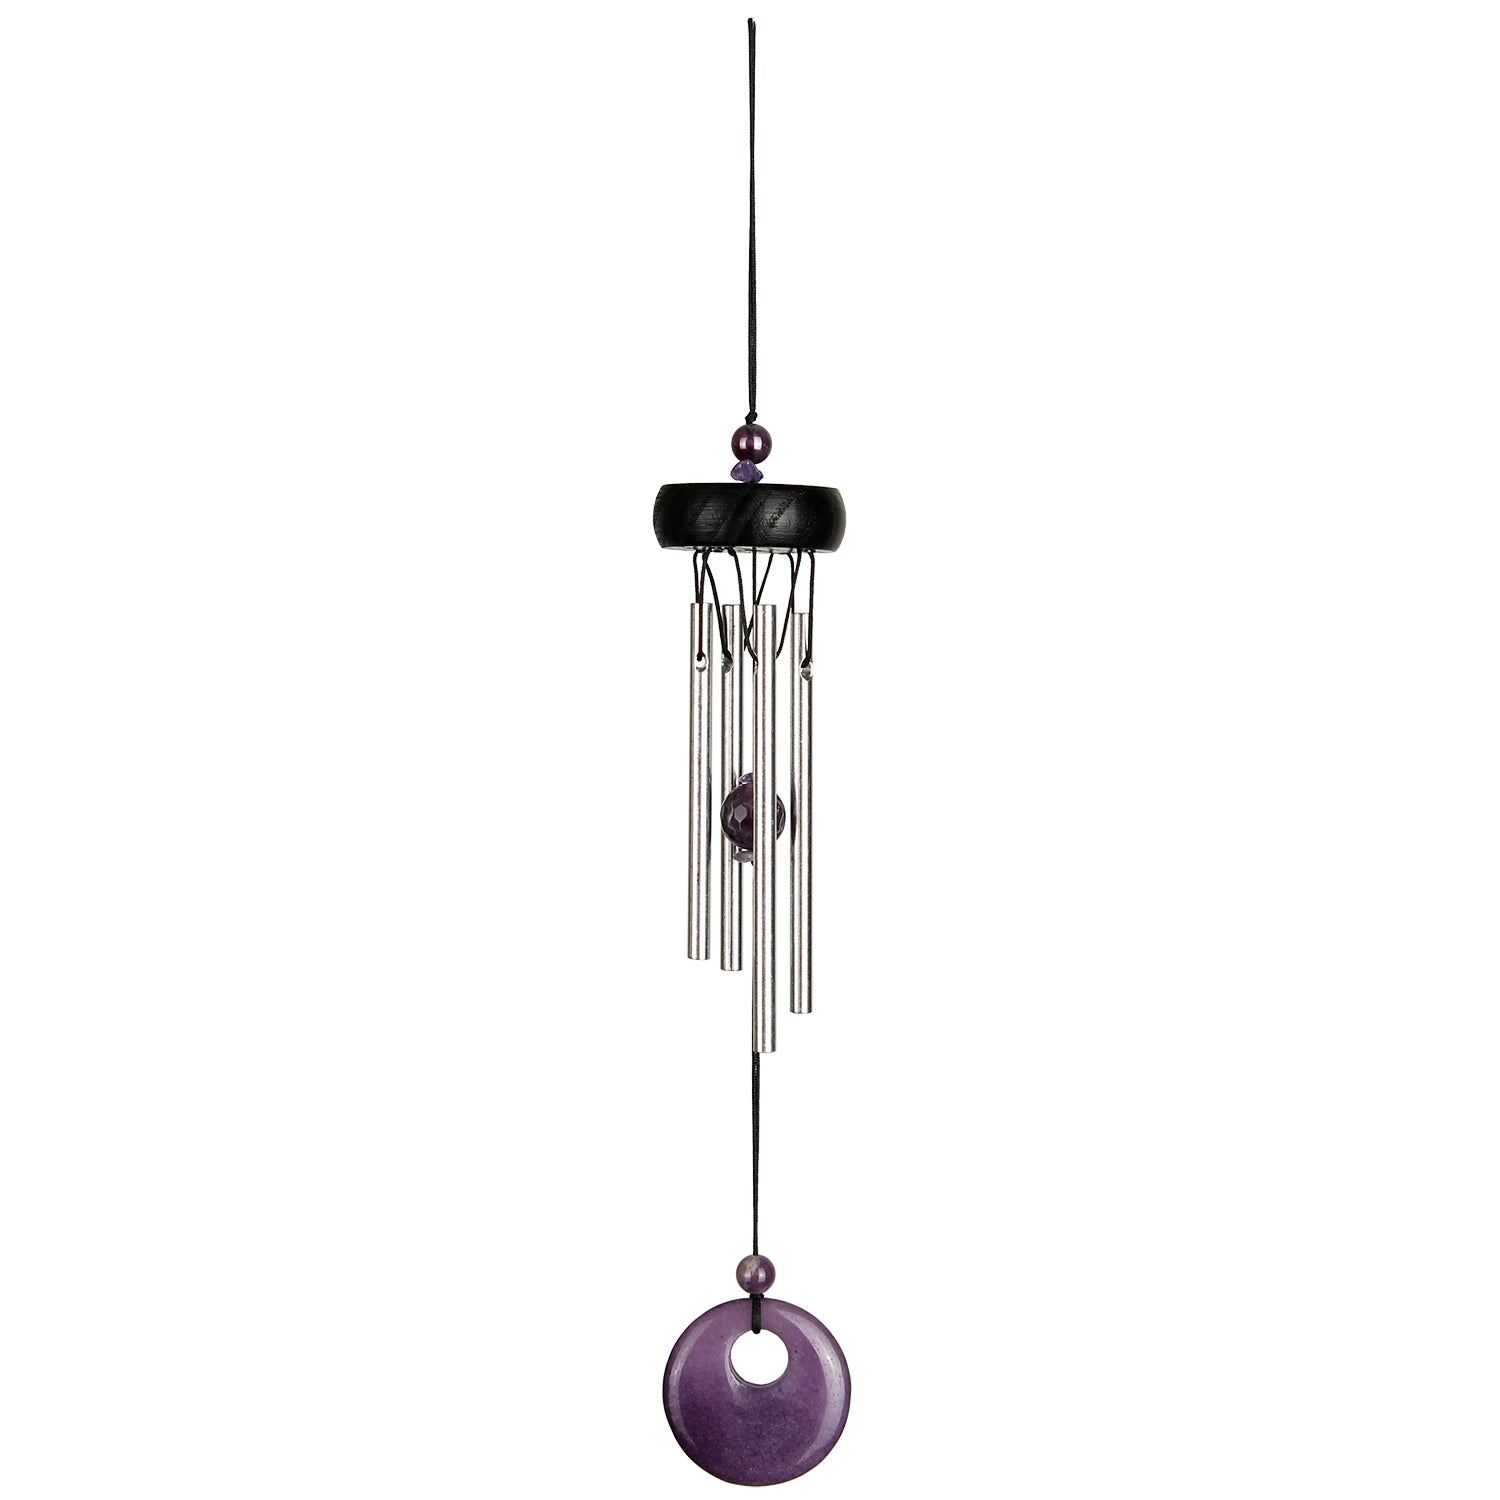 Precious Stones Chime - Amethyst full product image